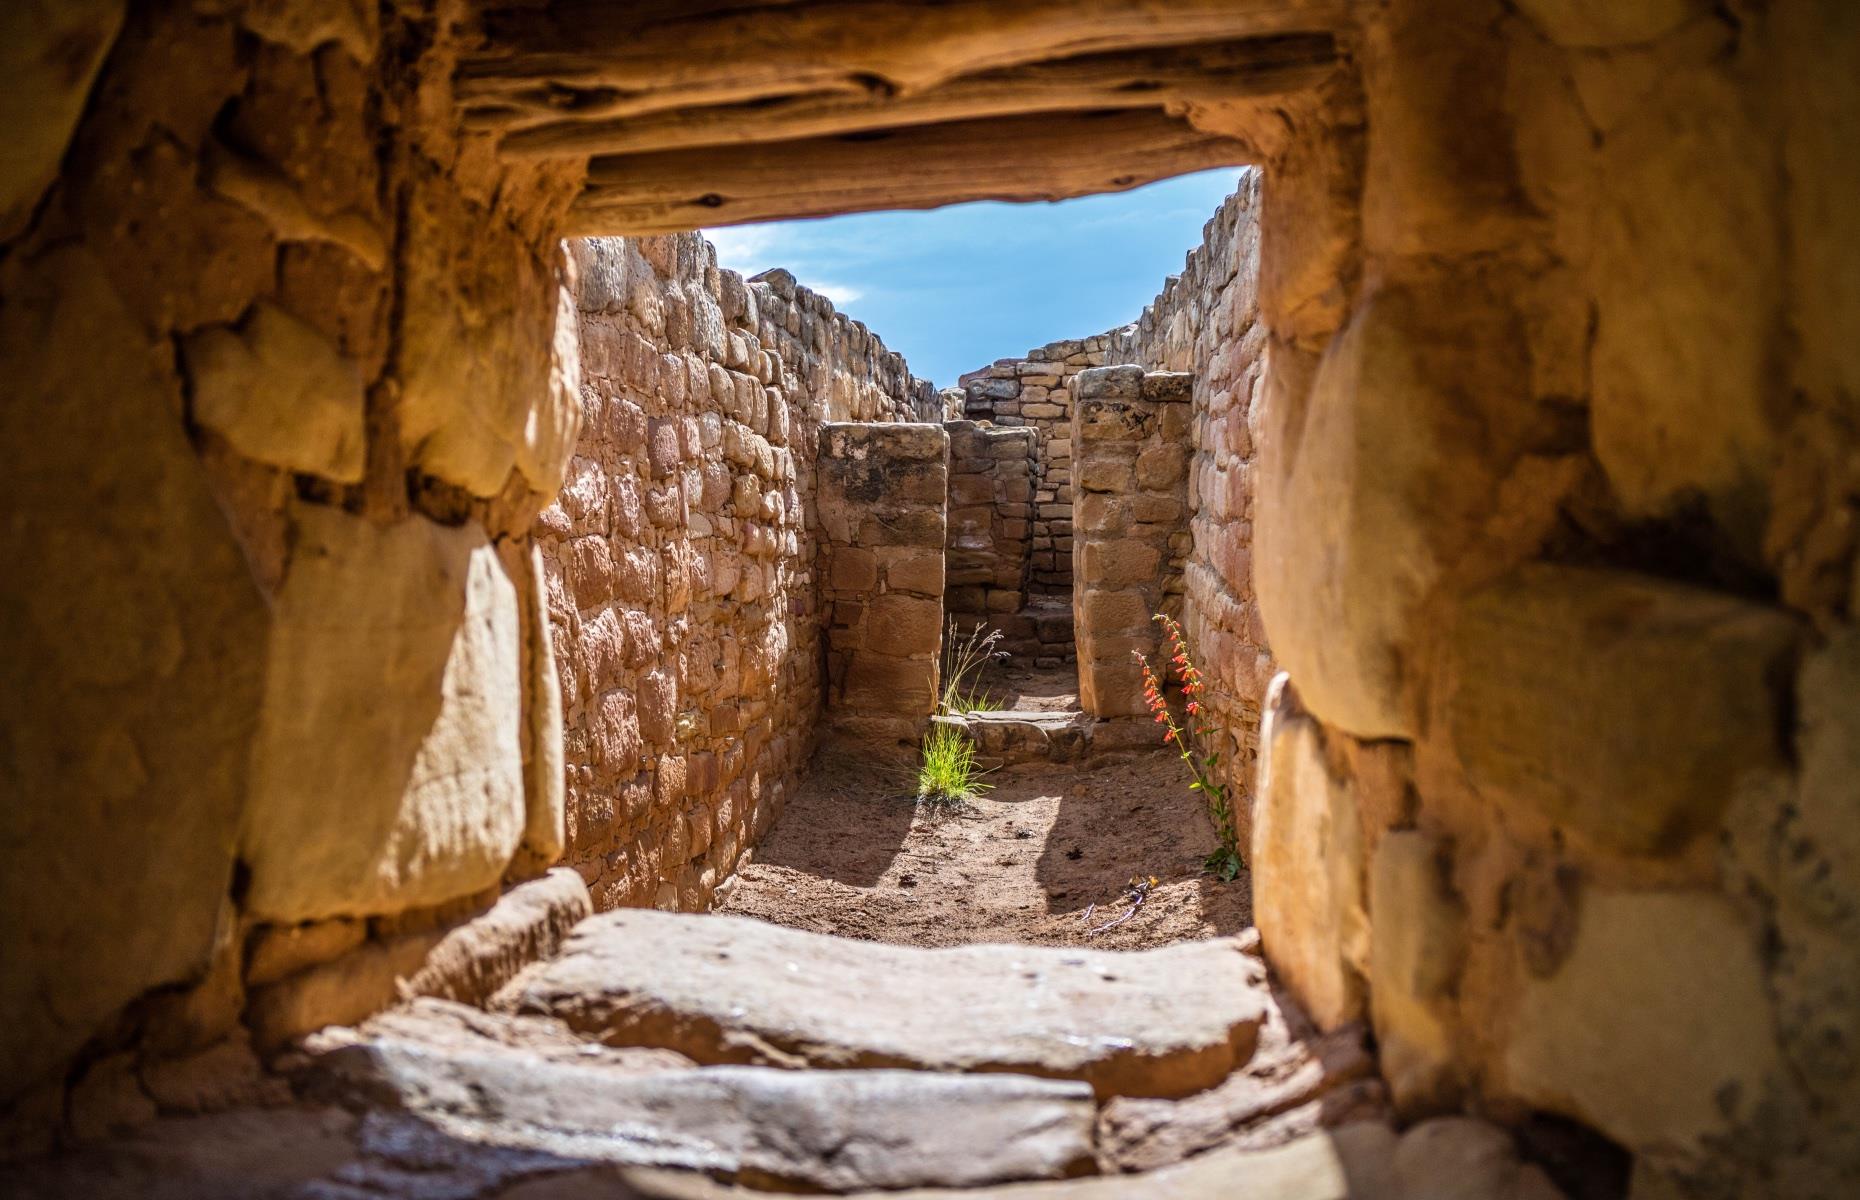 <p>In order to monitor the passing of the seasons, the Ancestral Puebloan people positioned windows, doors and walls along the path of the sun when building some of the biggest dwellings. Puebloans used astronomical observations to plan their farming and religious ceremonies, drawing on both natural features in the landscape and structures they built in this way.</p>